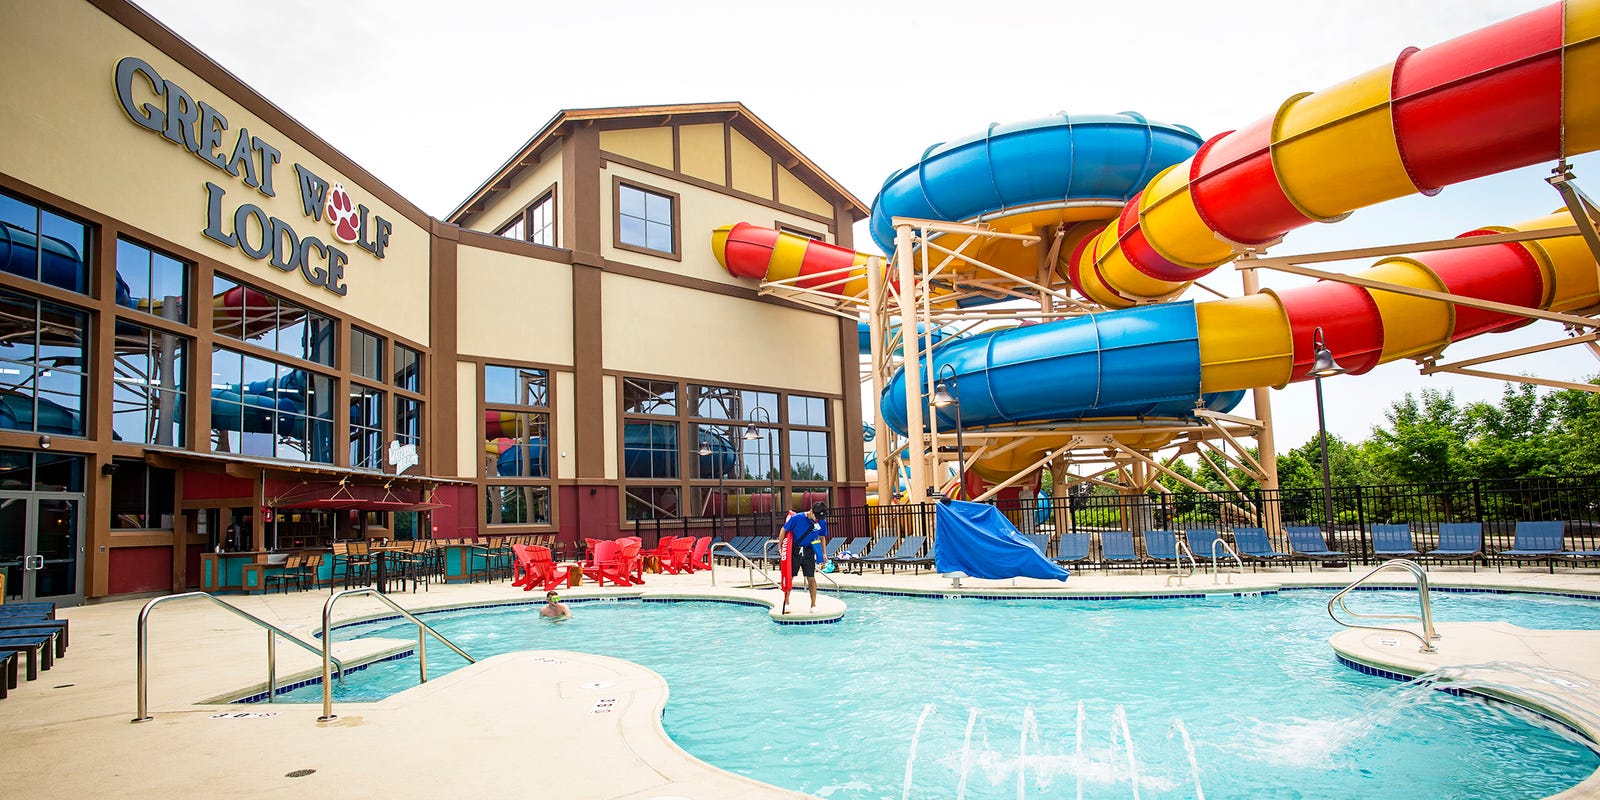 Great Wolf Lodge Illinois In Gurnee Is Set To Open For Business